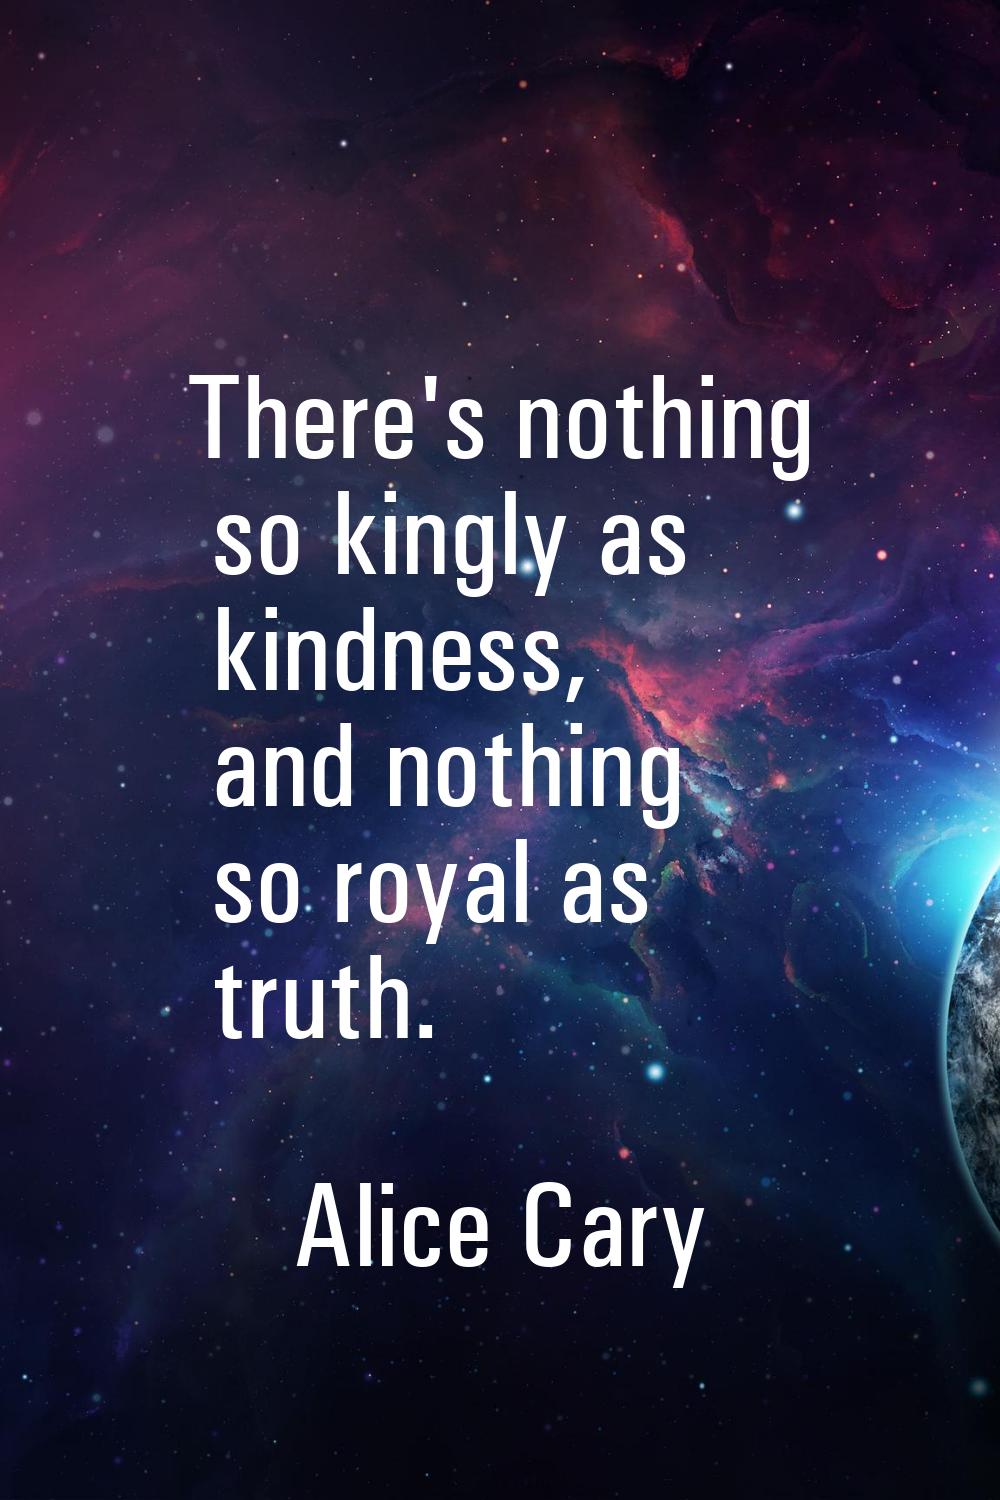 There's nothing so kingly as kindness, and nothing so royal as truth.